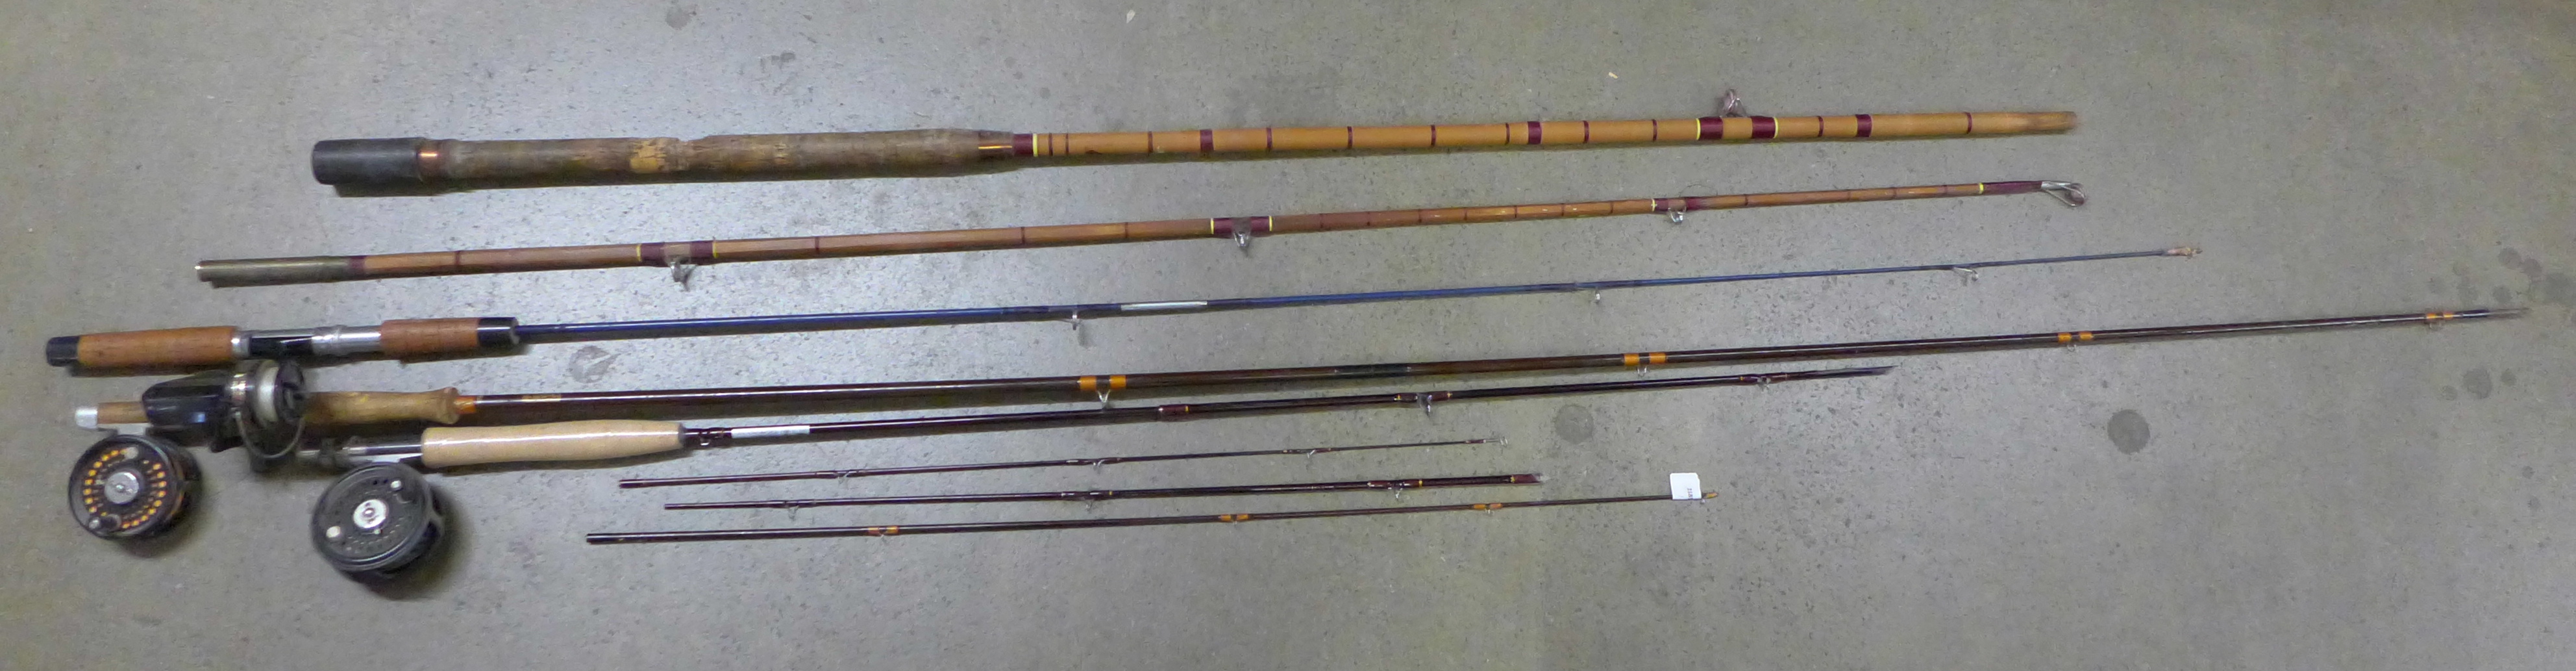 A collection of fishing rods including one Hardy